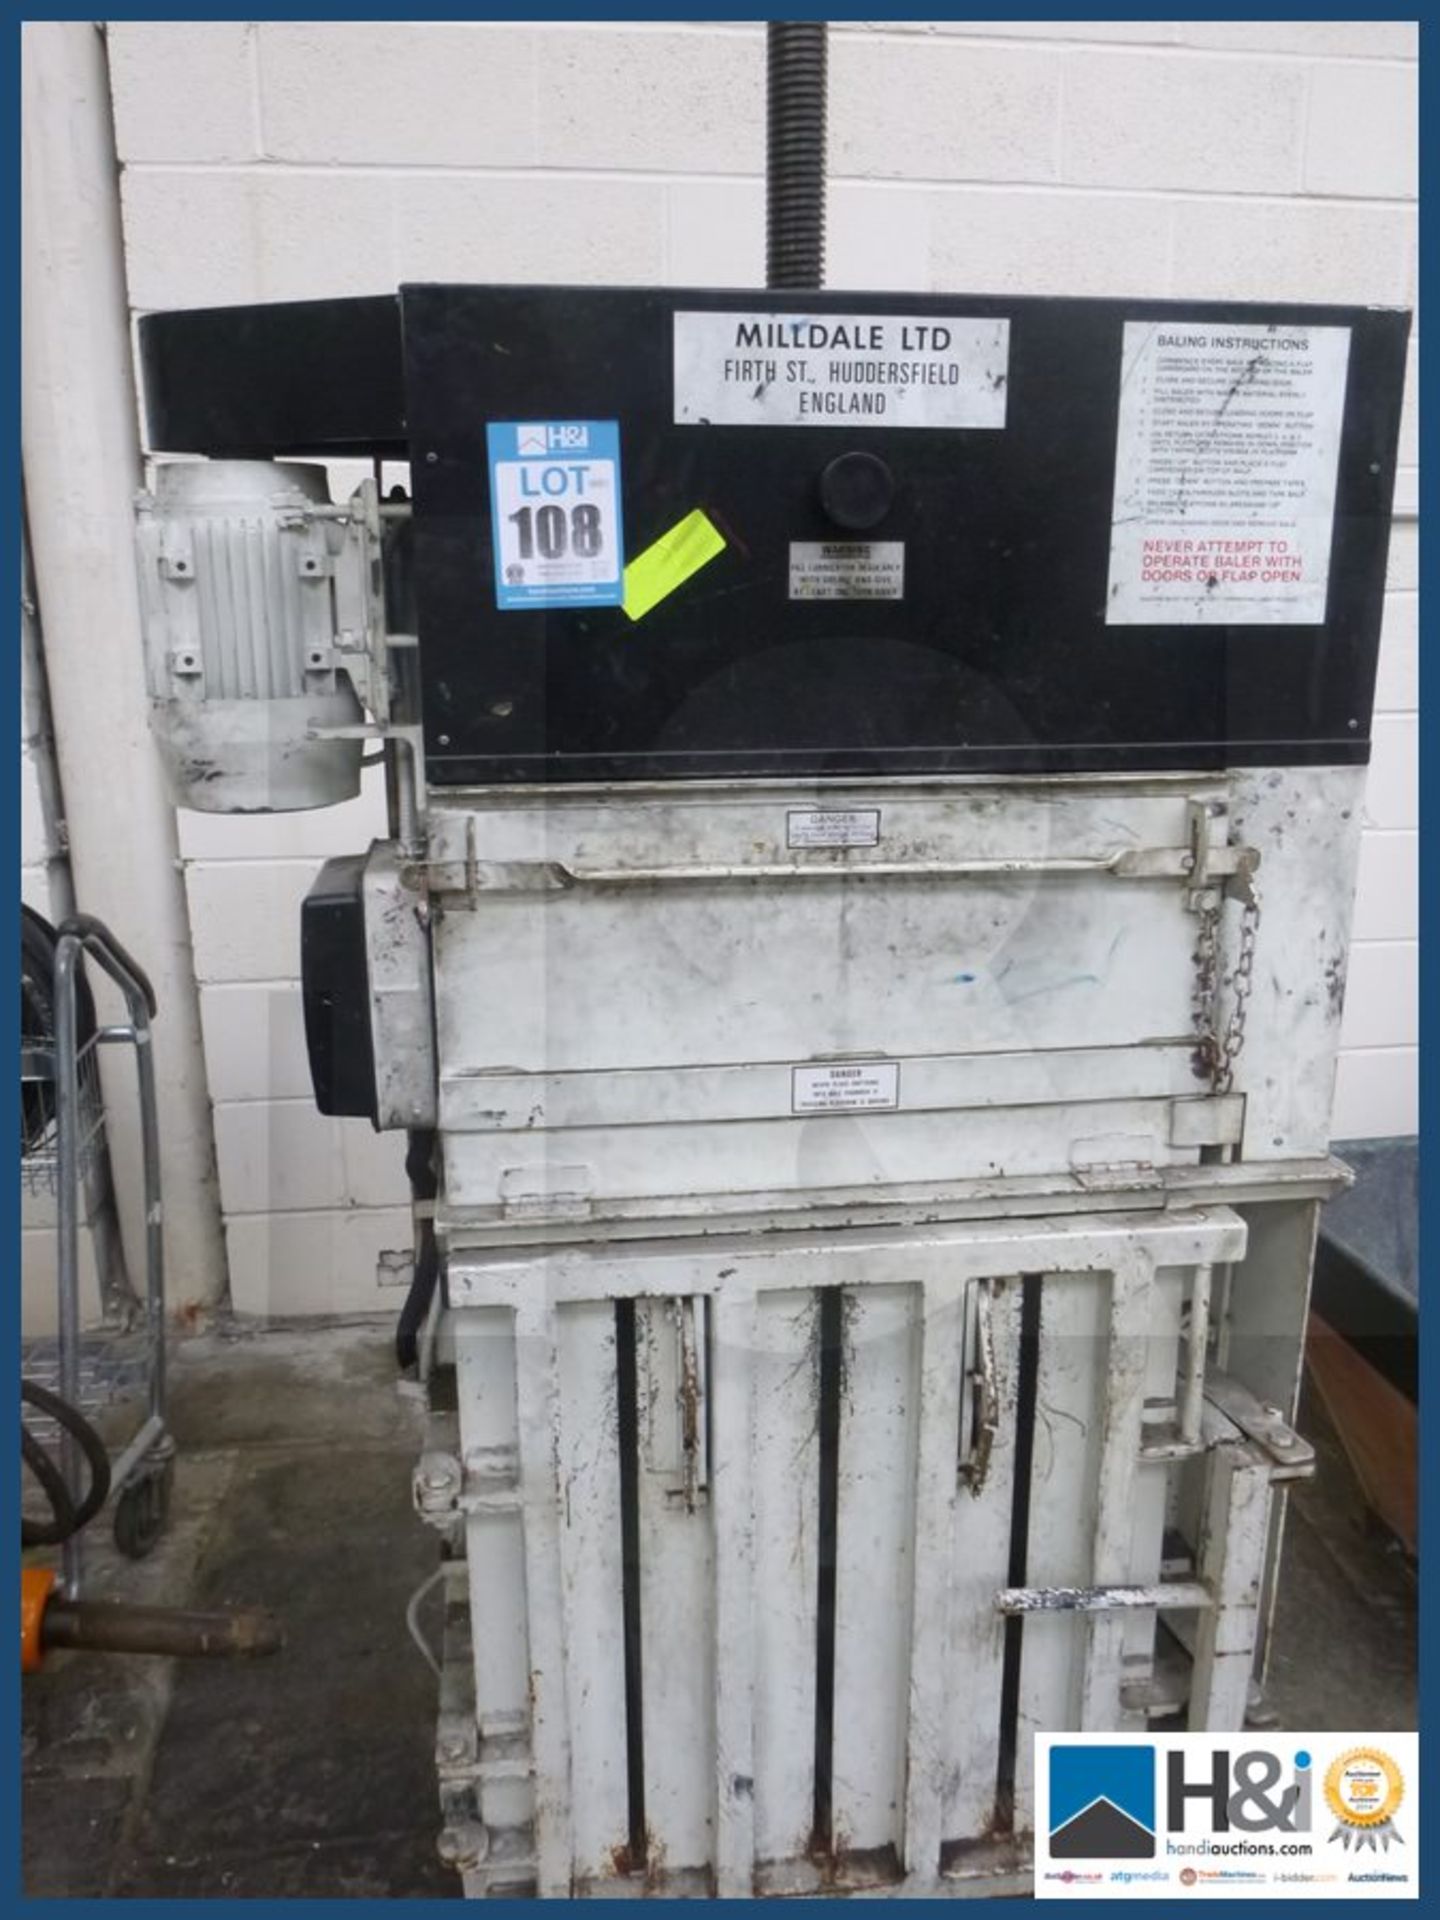 Milldale three phase half size bailing machine advised in working condition. Appraisal: Used,